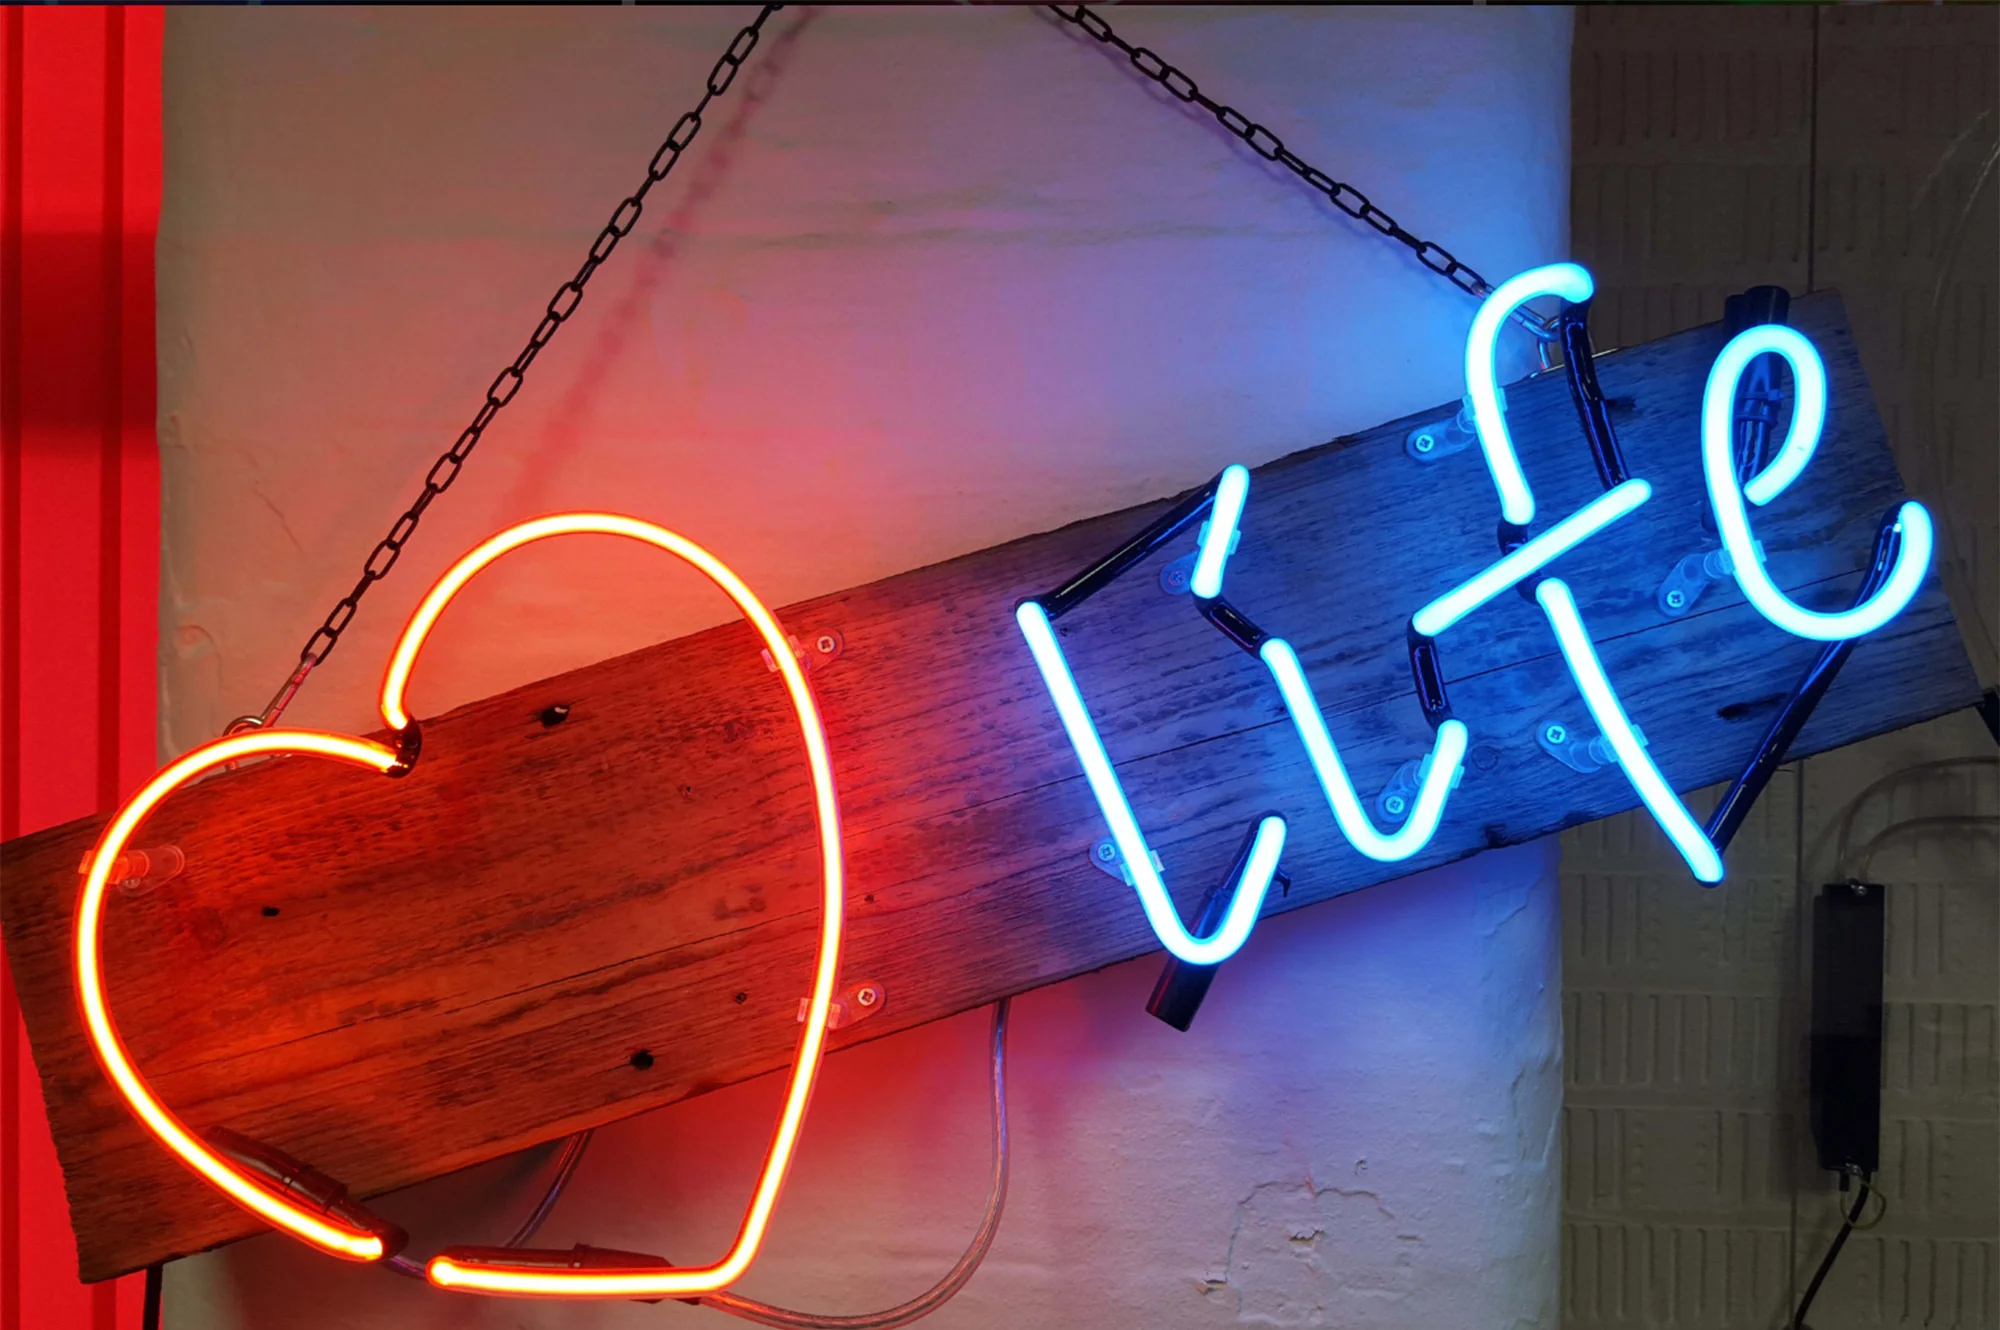 A neon sign with a warm red heart and the word 'life' in cool blue, mounted on a rustic wooden board that adds a charming contrast between the organic and the luminous.